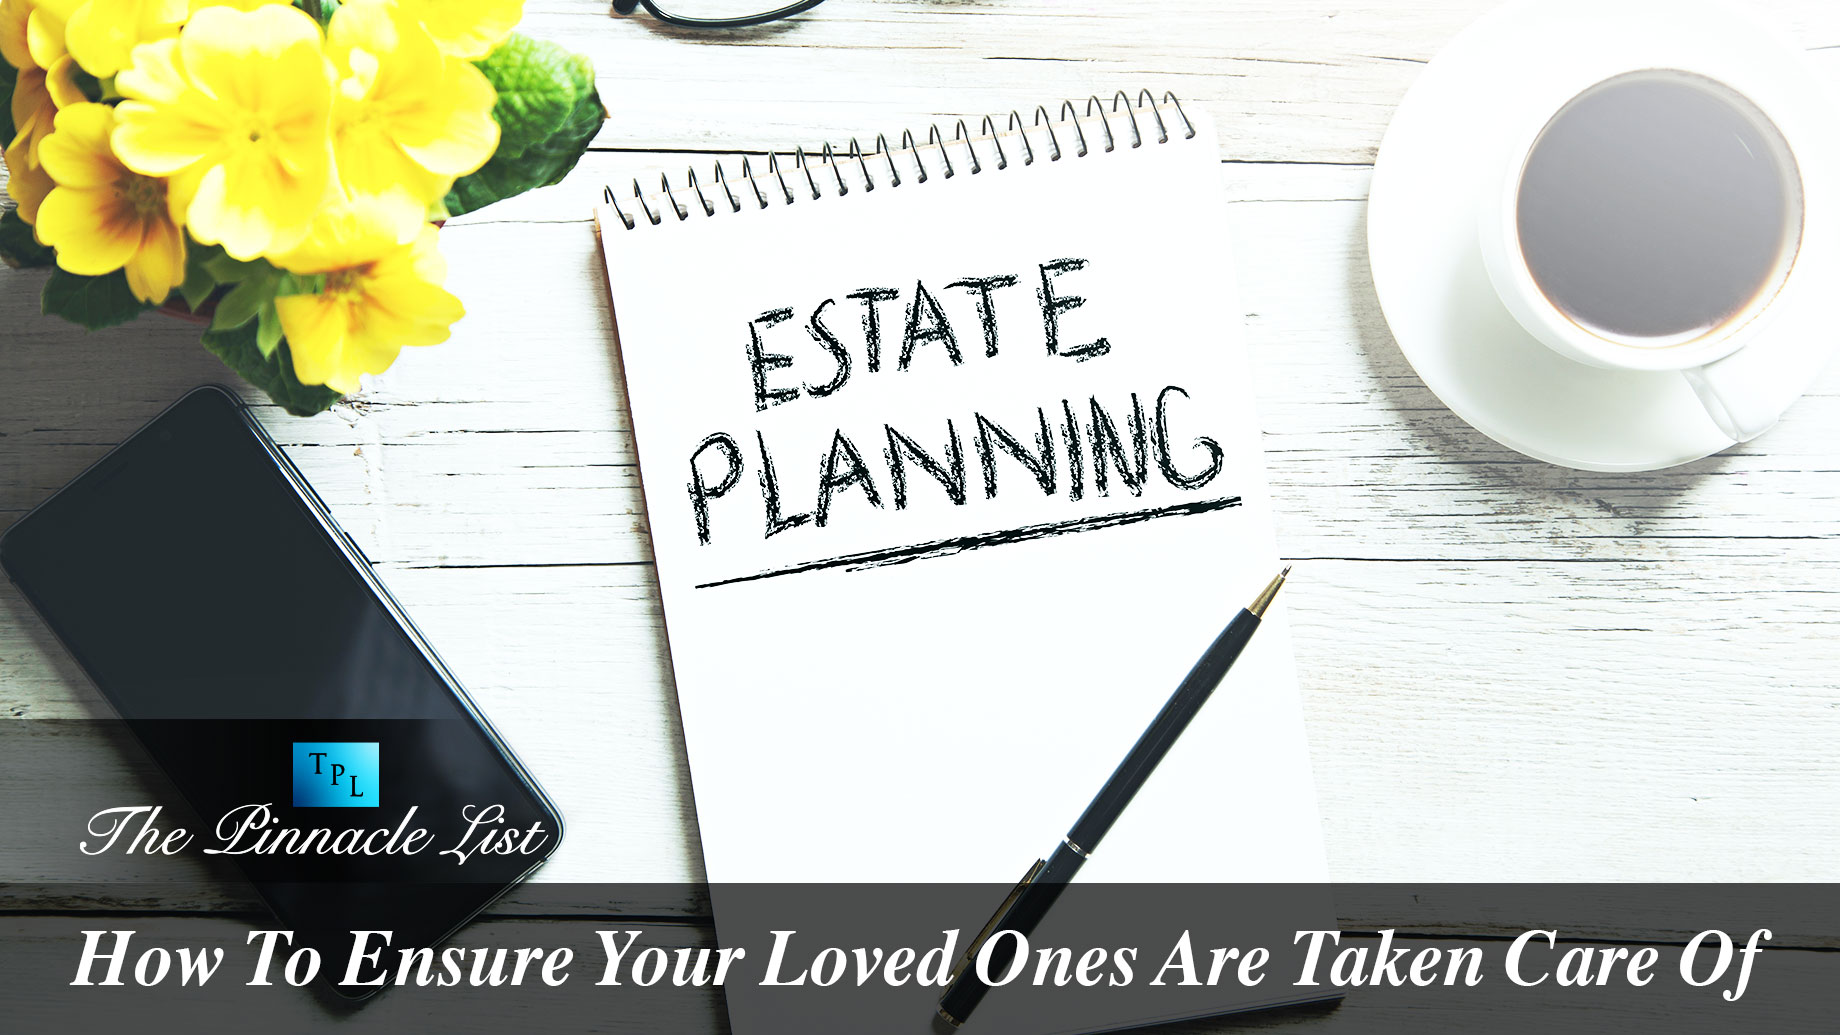 Estate Planning - How To Ensure Your Loved Ones Are Taken Care Of